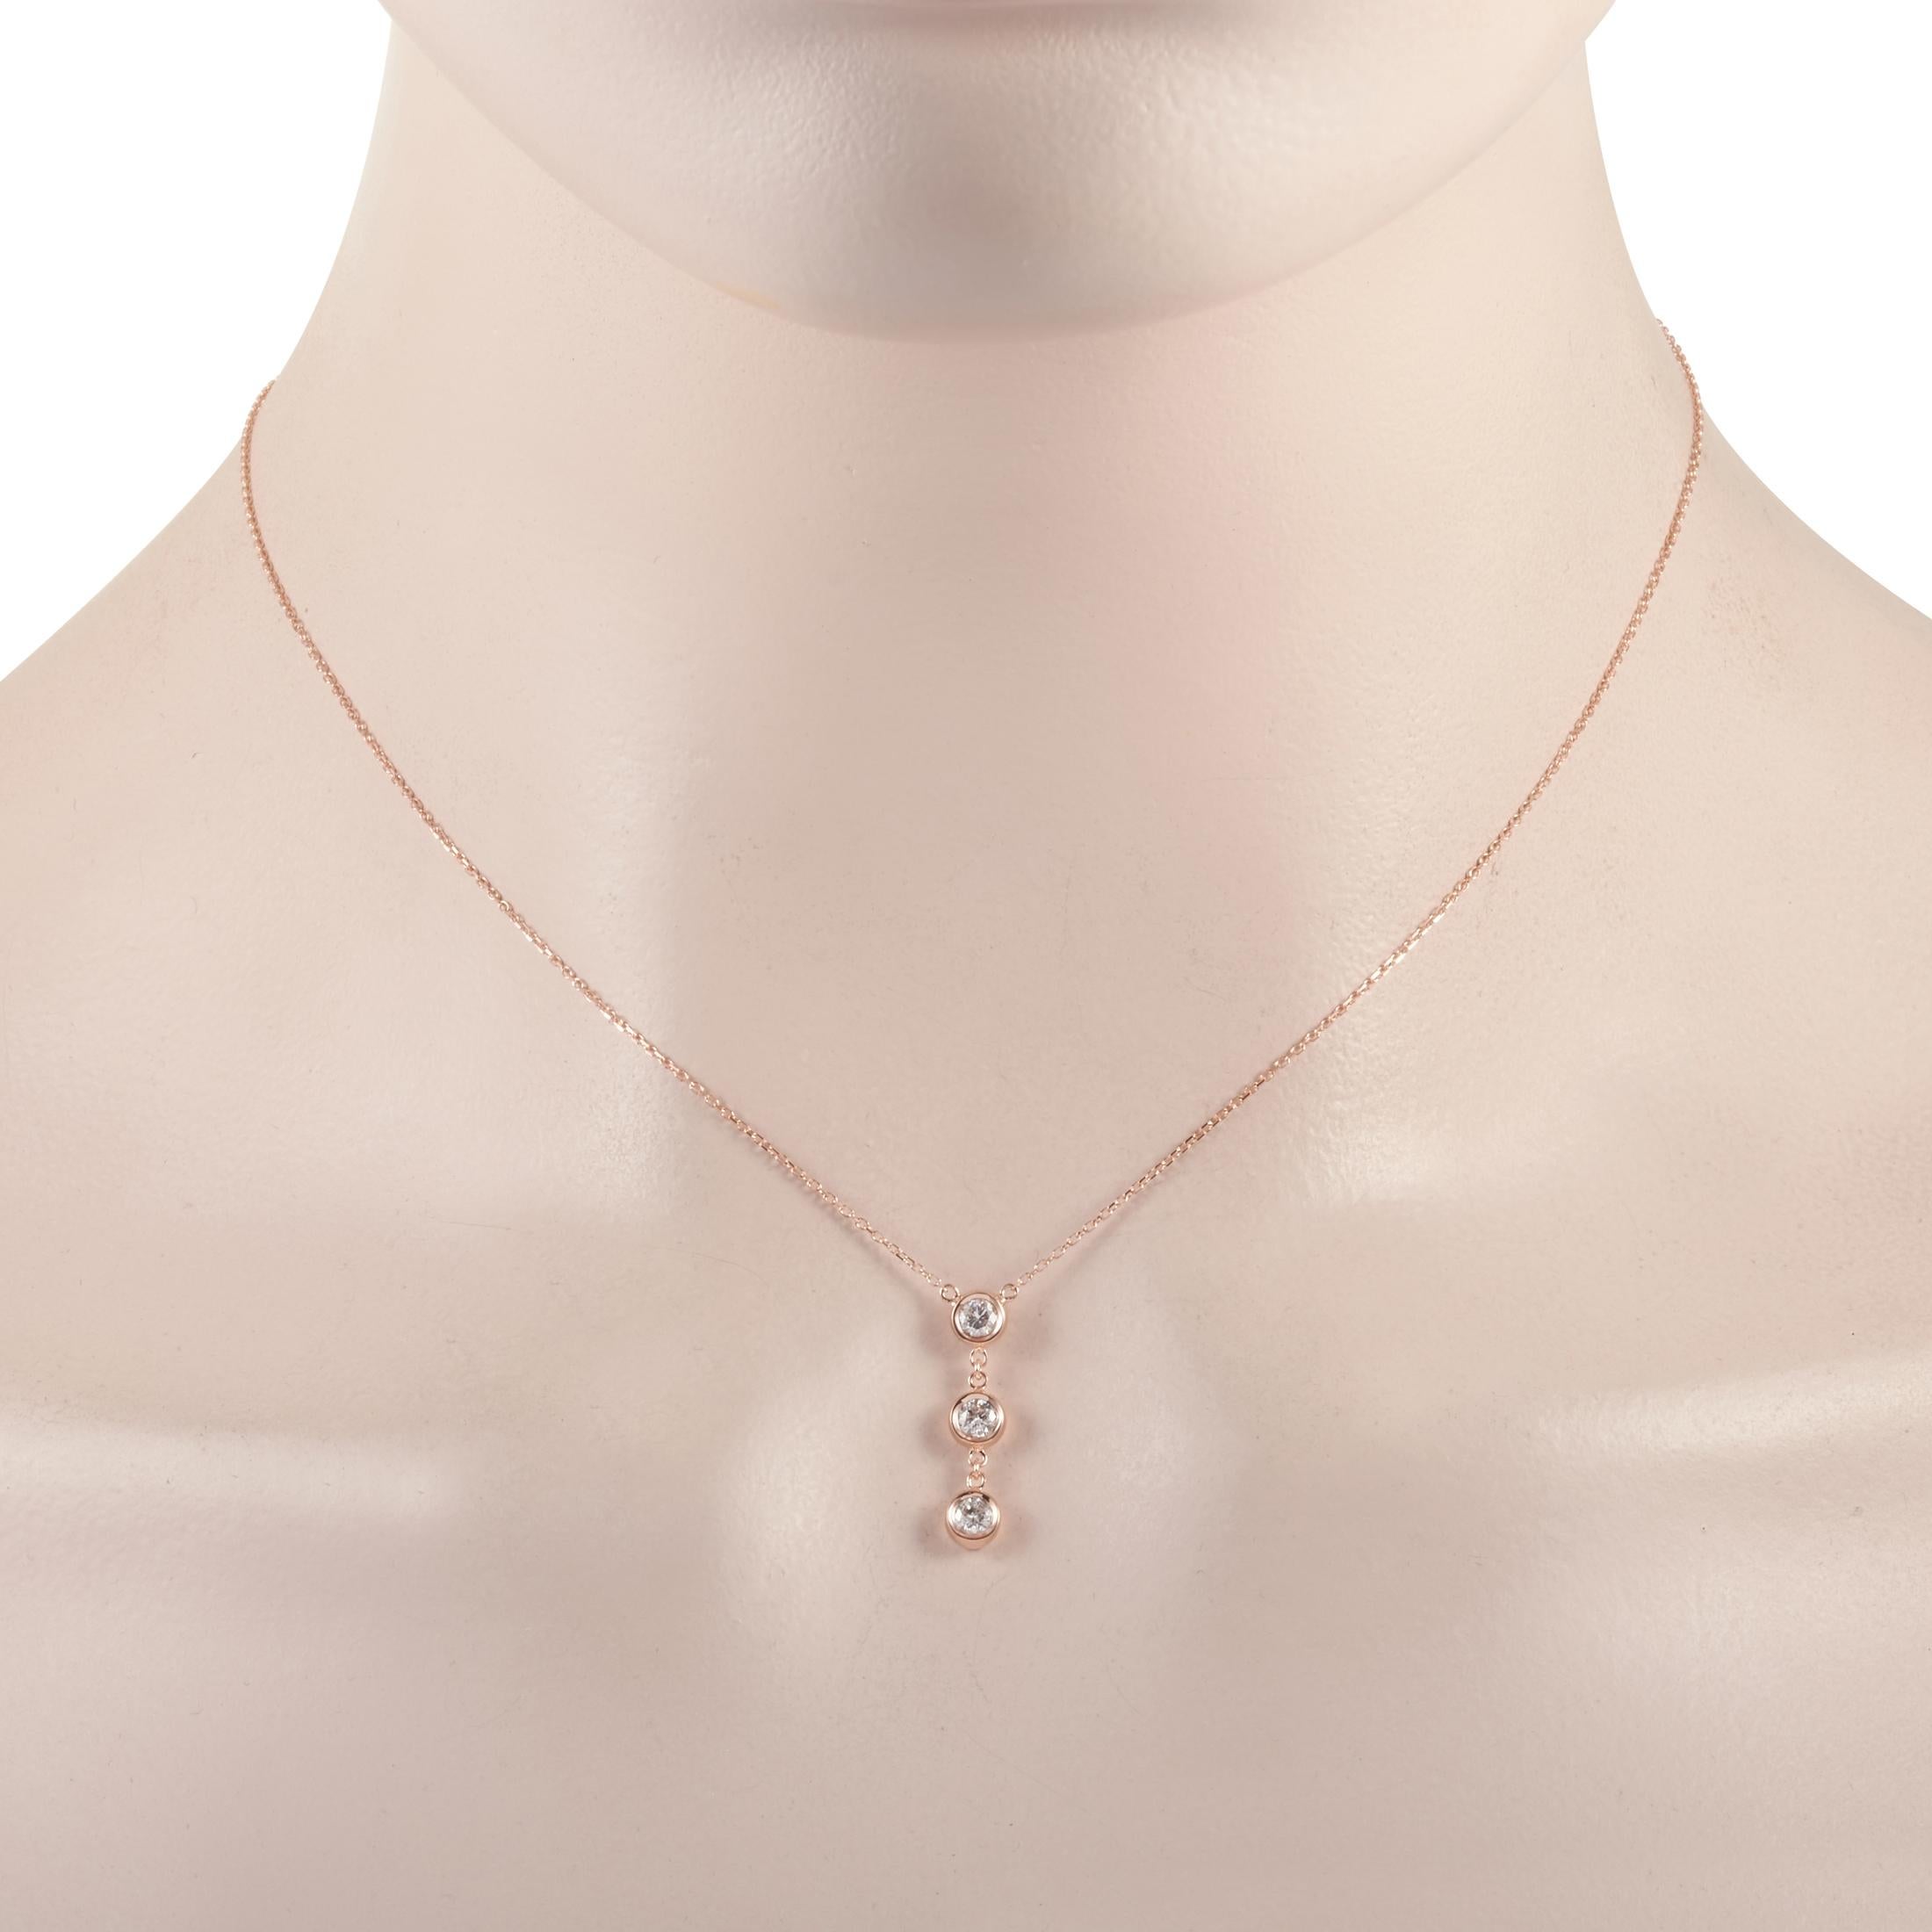 This LB Exclusive necklace is made of 14K rose gold and embellished with diamonds that amount to 0.35 carats. The necklace weighs 1.9 grams and boasts a 15” chain and a pendant that measures 0.75” in length and 0.13” in width.
 
 Offered in brand